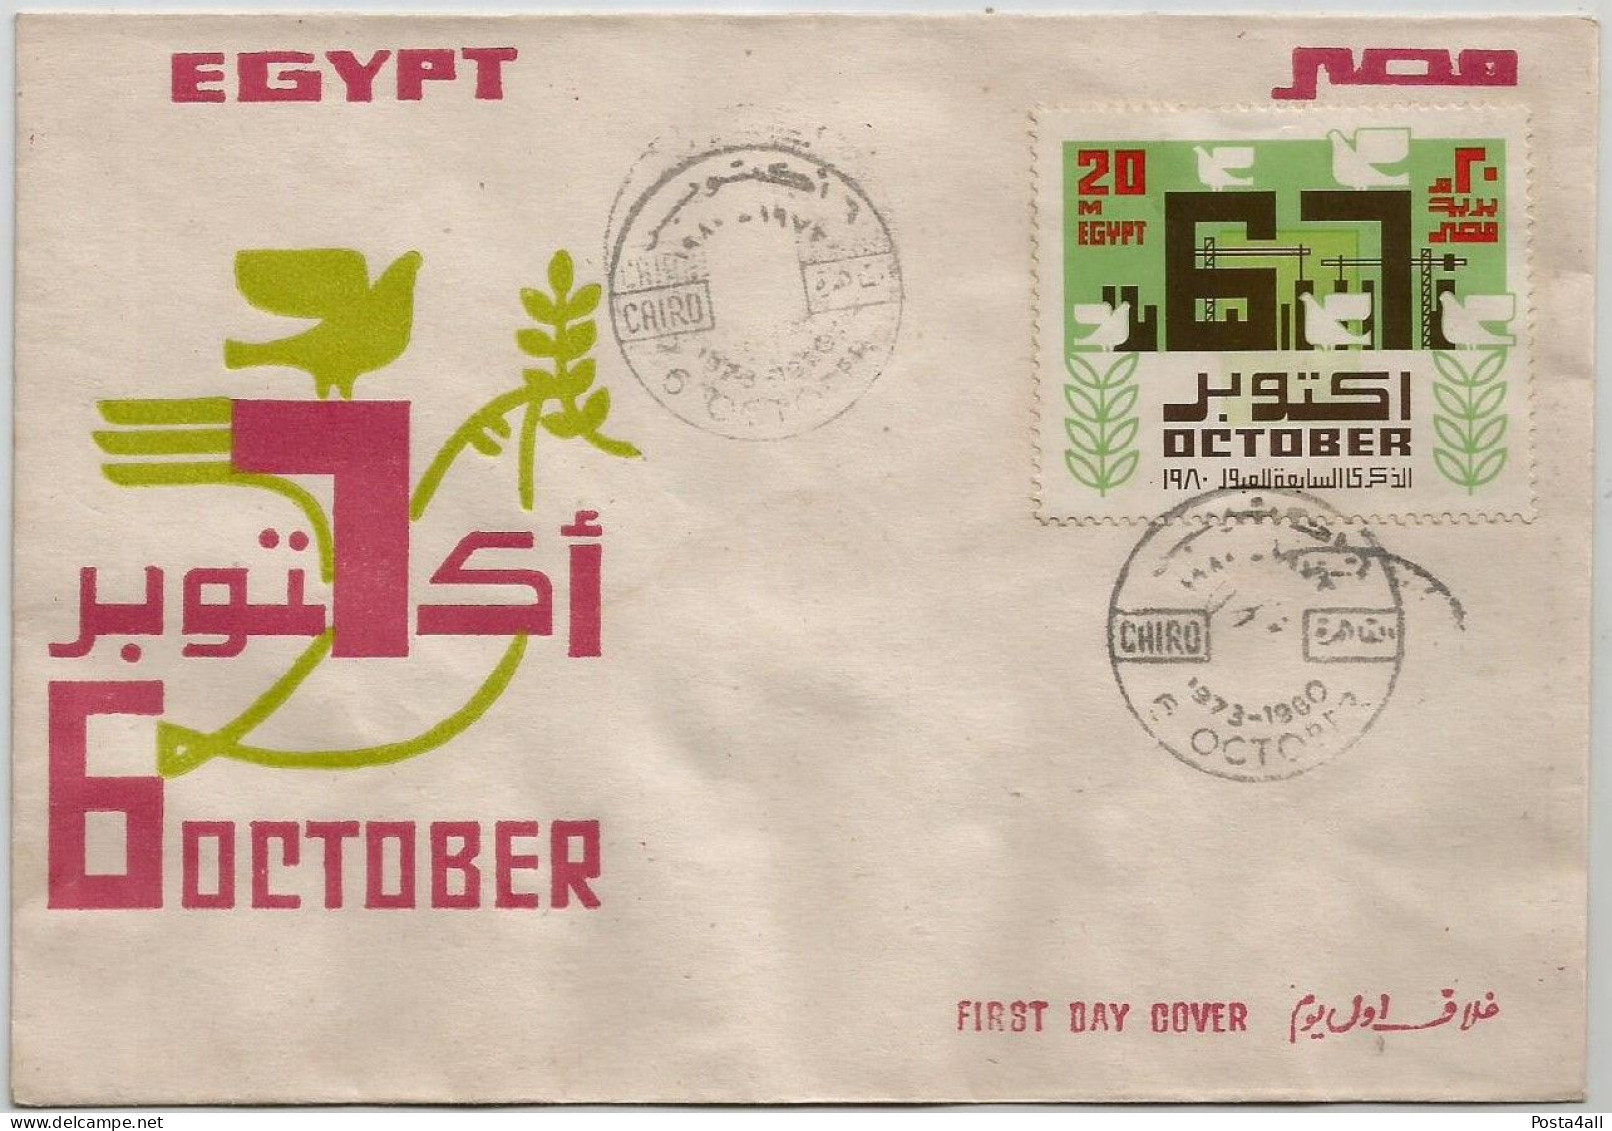 Egypt - 1980 The 7th Anniversary Of Suez Crossing - Yom Kippur War -  Complete Issue  - FDC - Covers & Documents